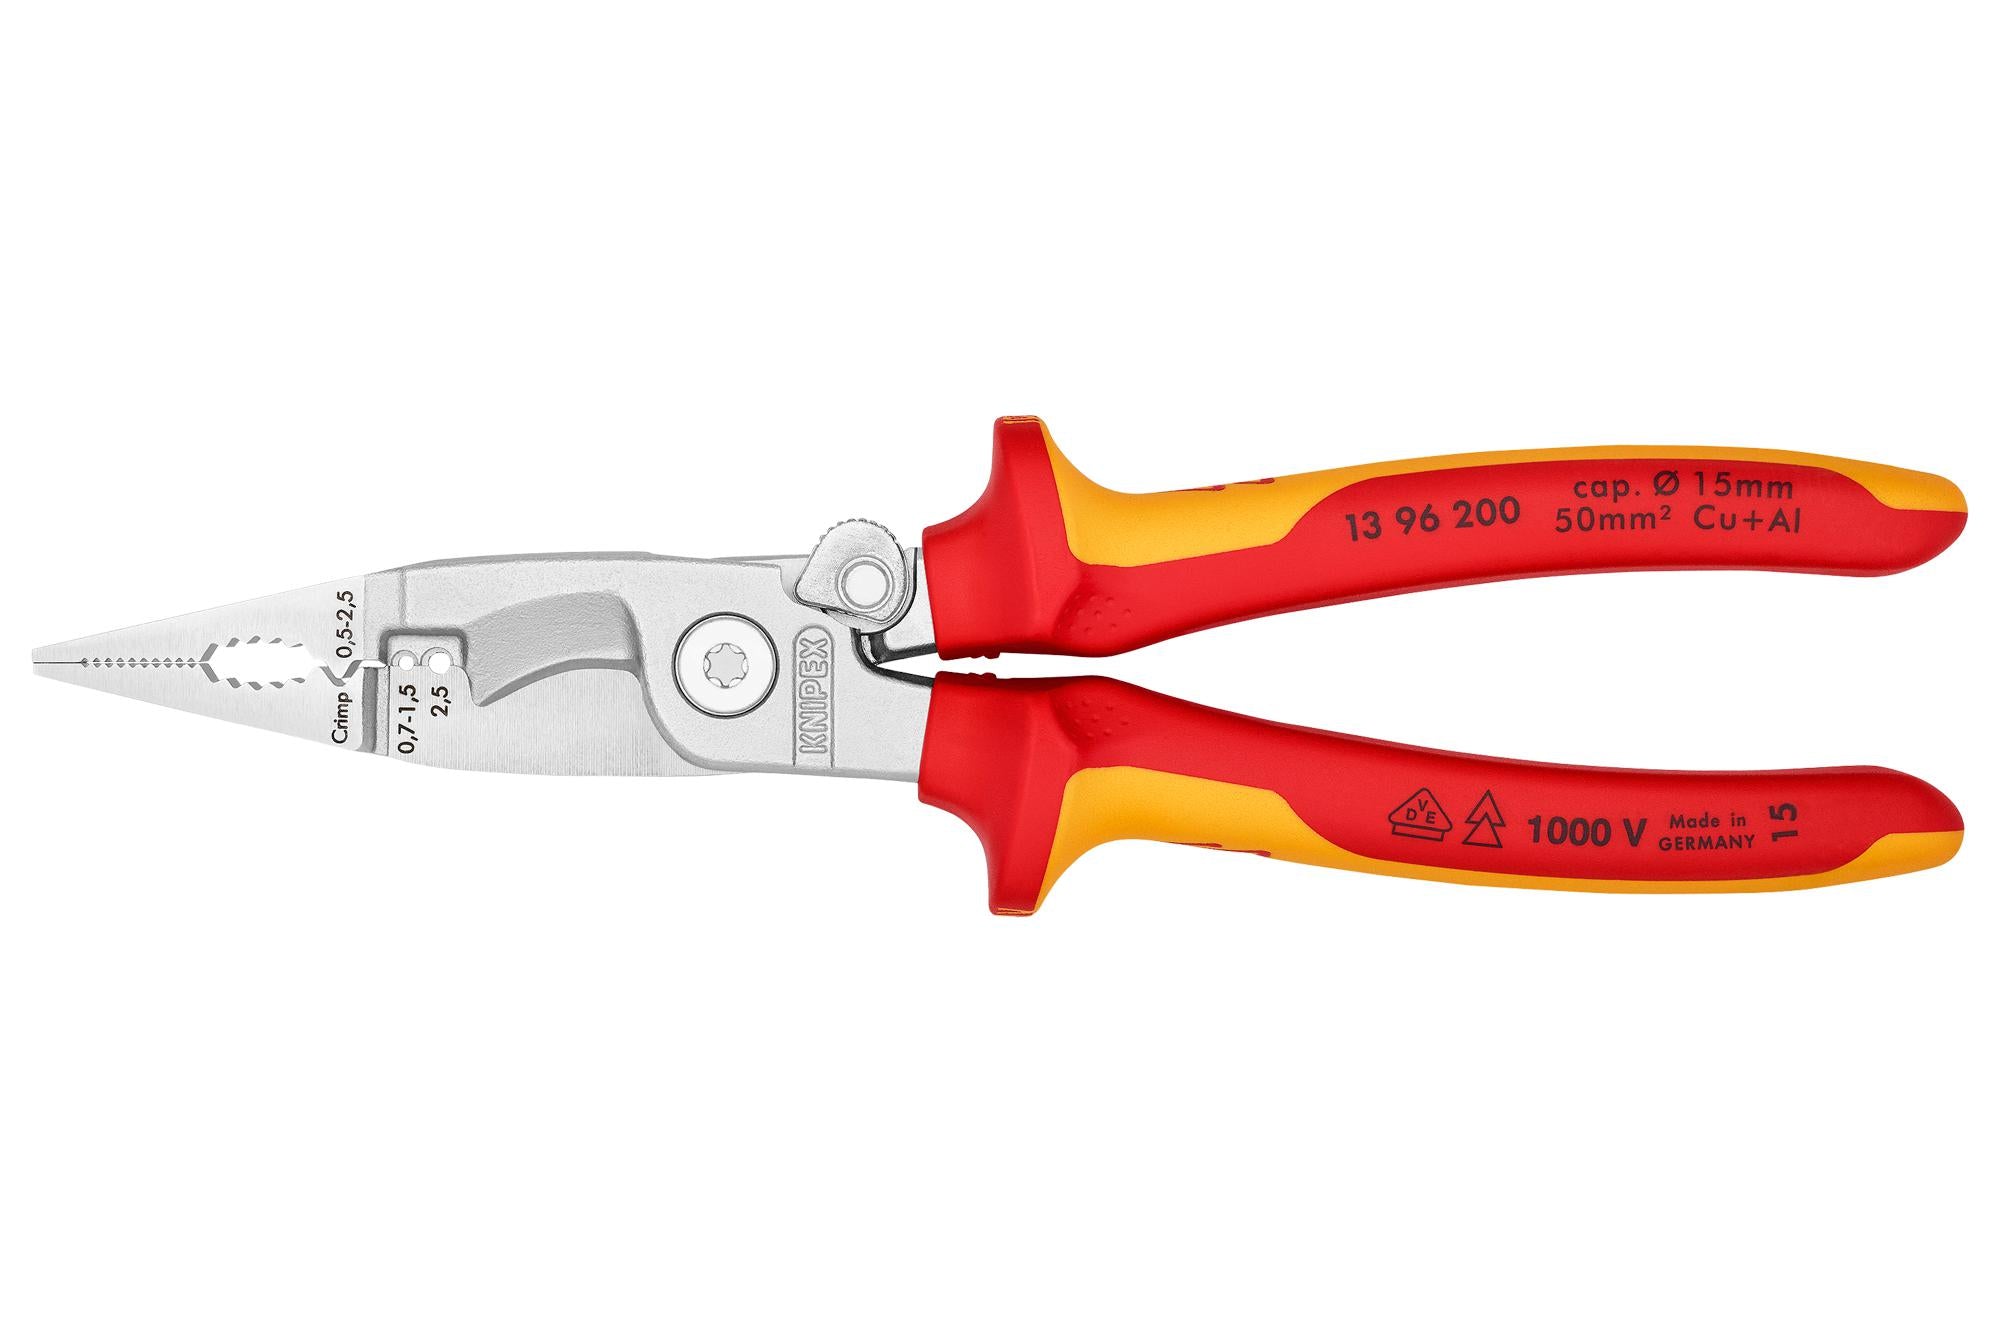 13 96 200 PLIER / CUTTER, ELECTRICIAN, VDE KNIPEX